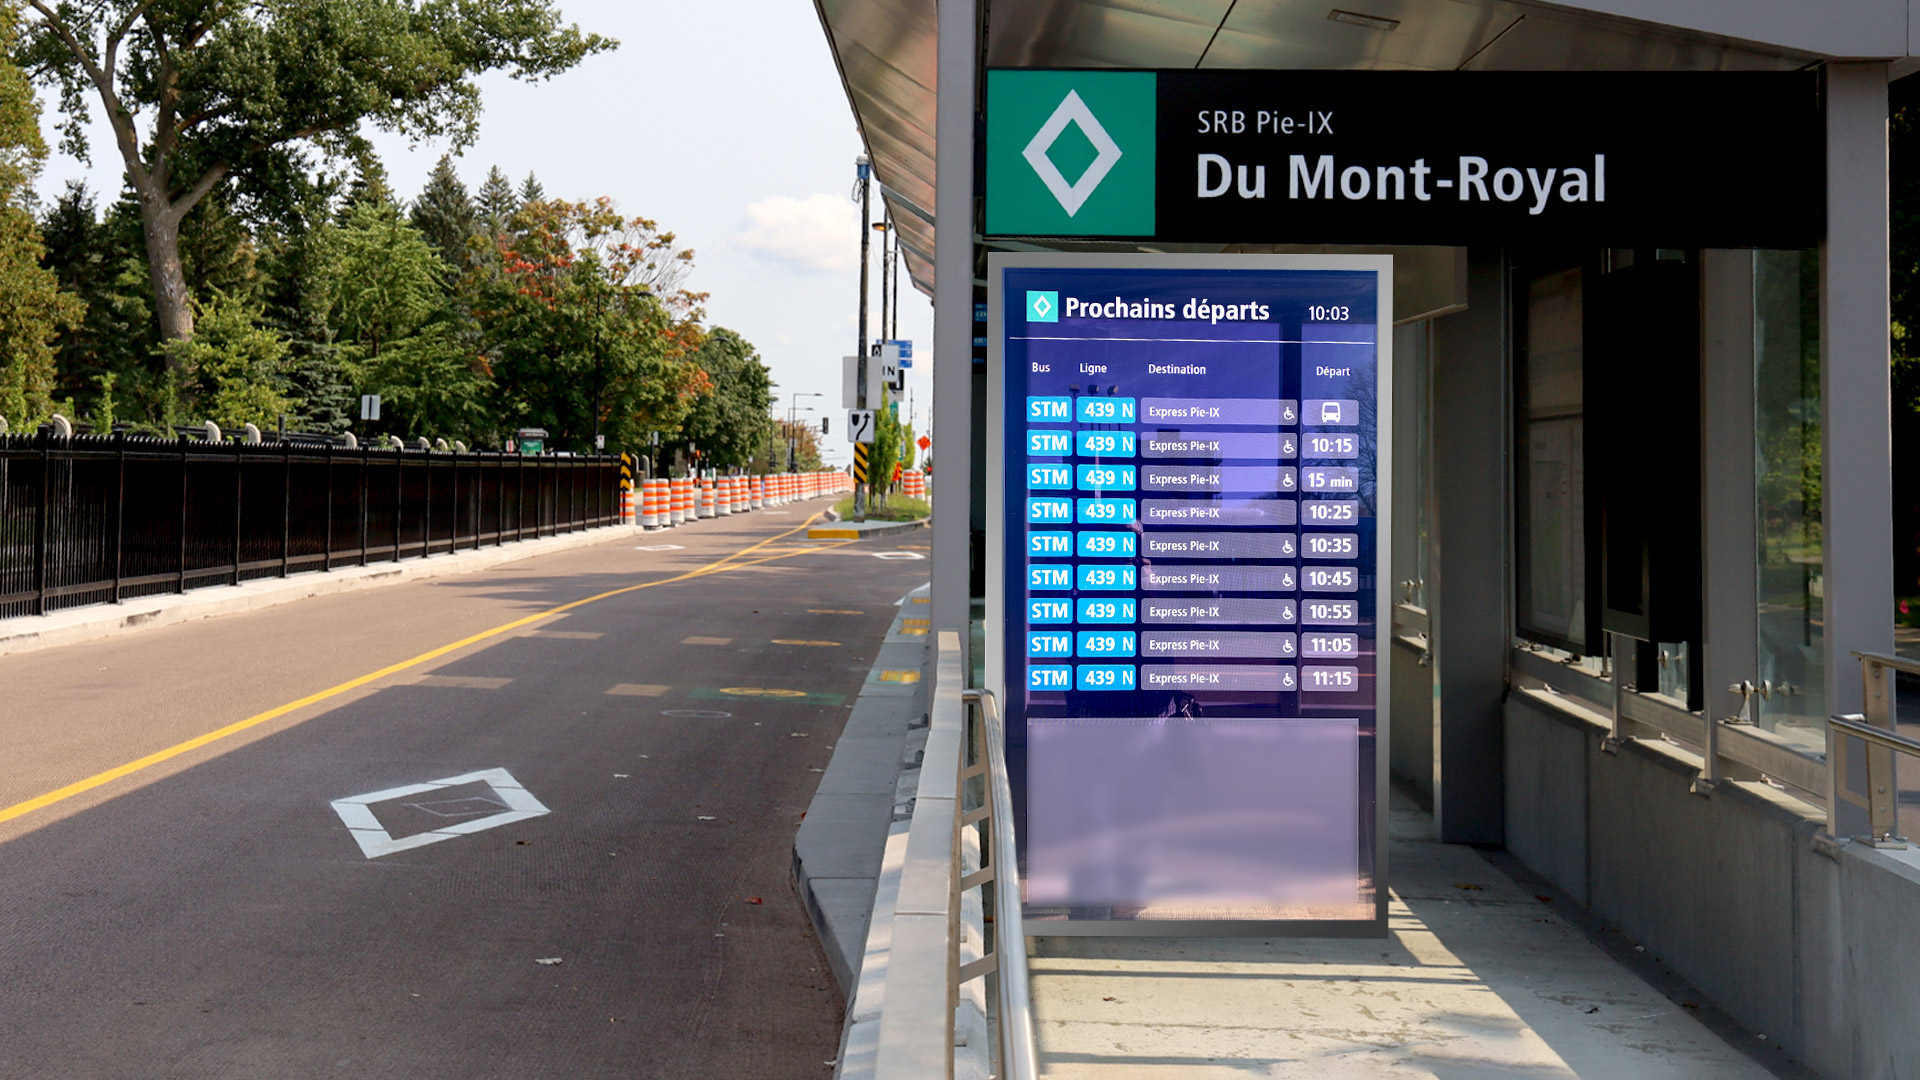 Passenger Information System for the Pie-IX BRT Project